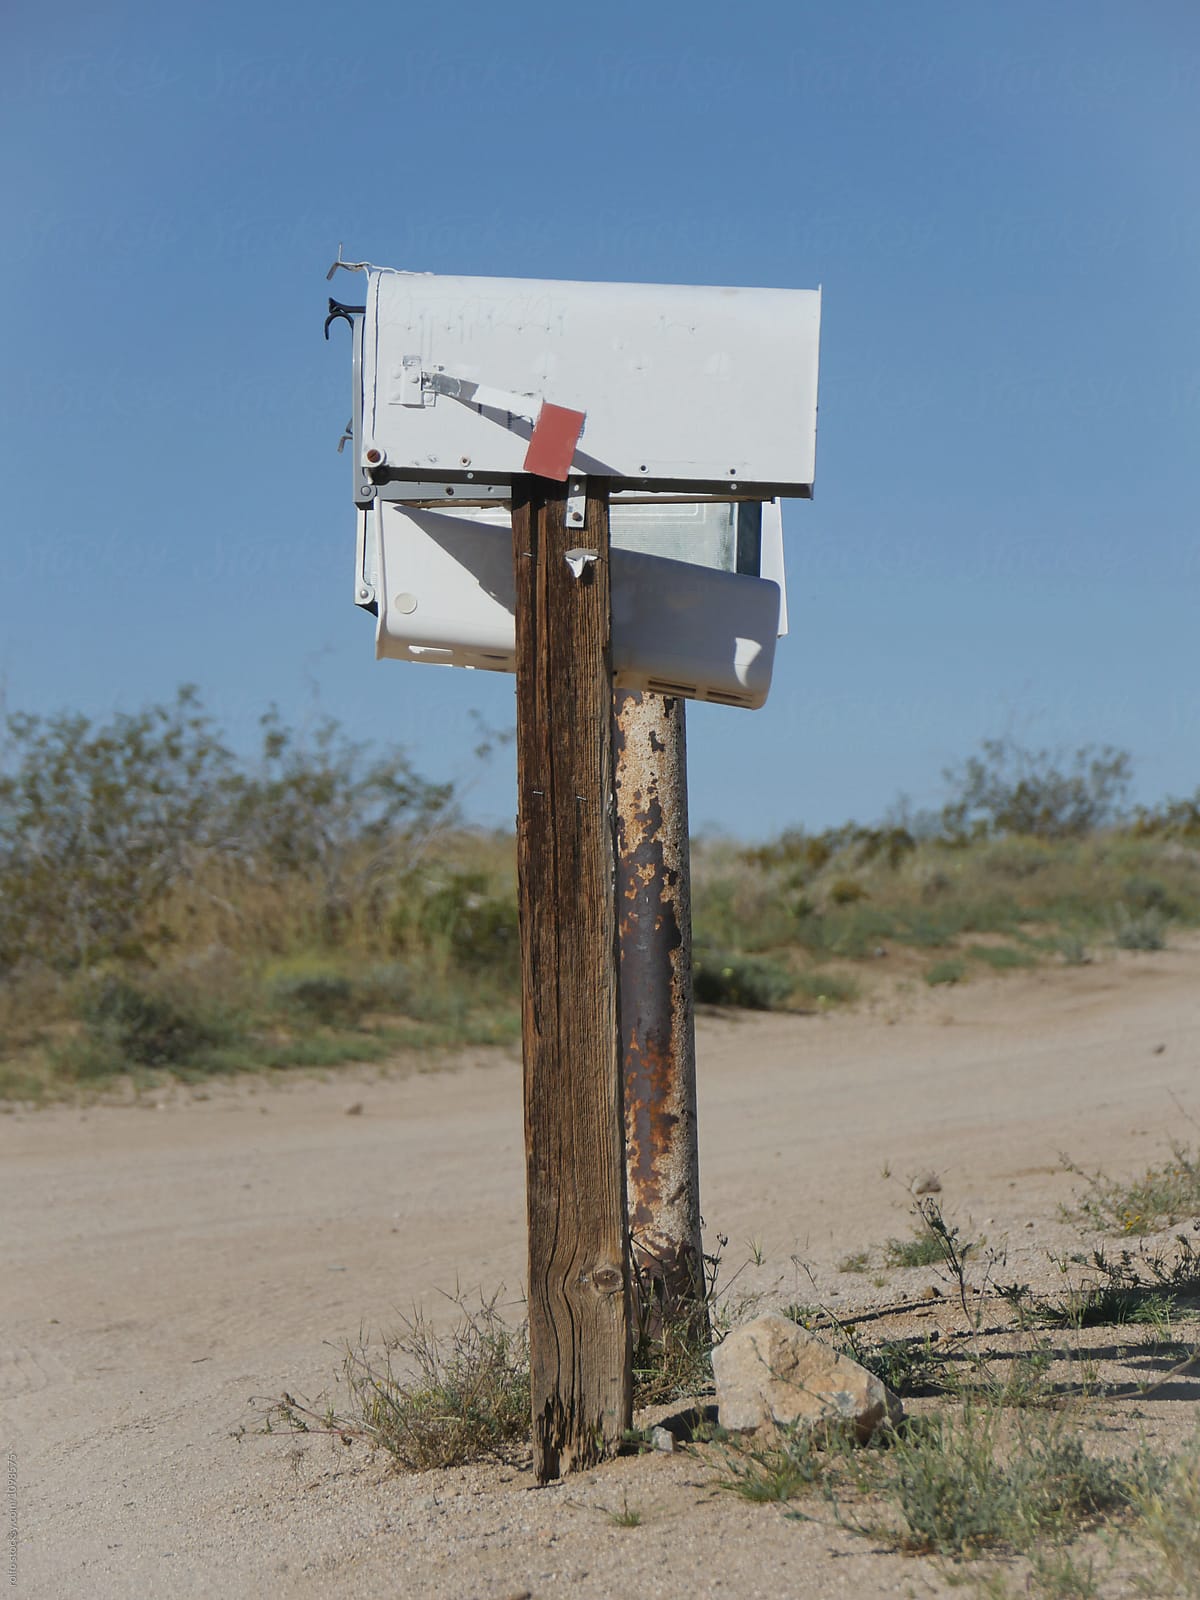 Several mailboxes with address